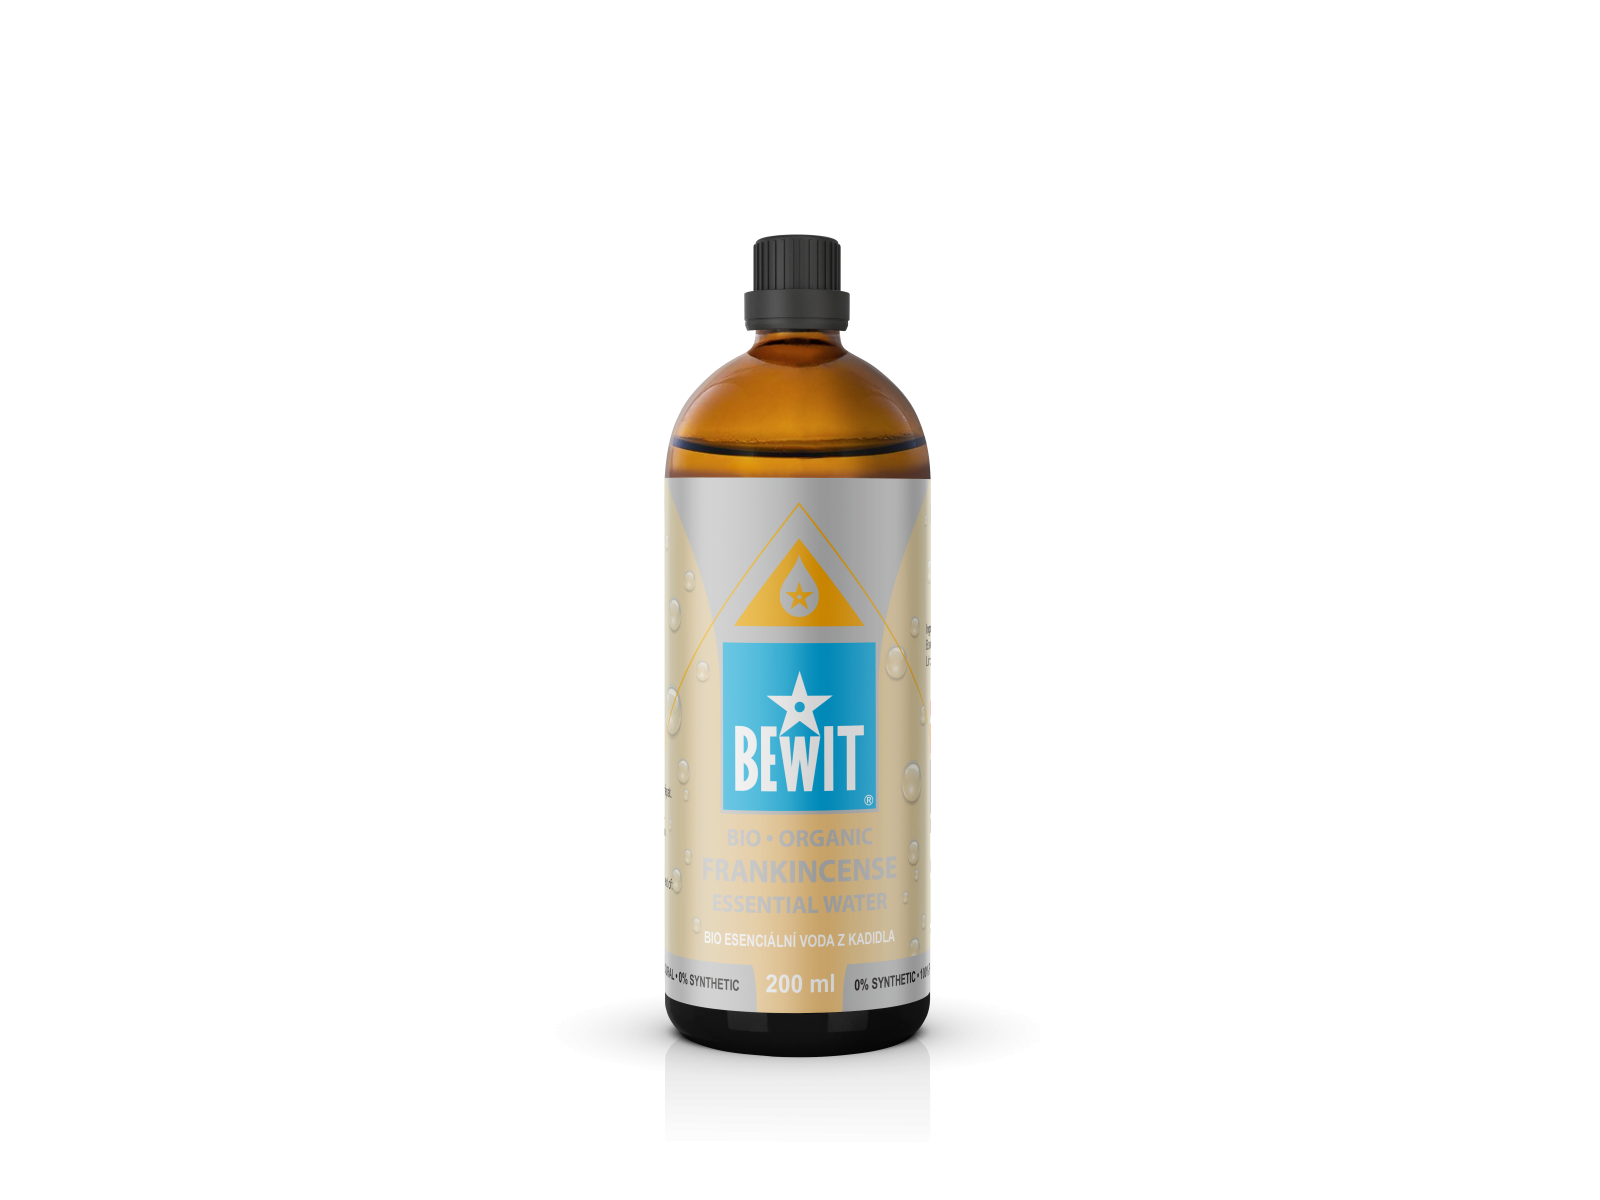 BEWIT essential water of incense ORGANIC - 100% NATURAL HYDROLYTE